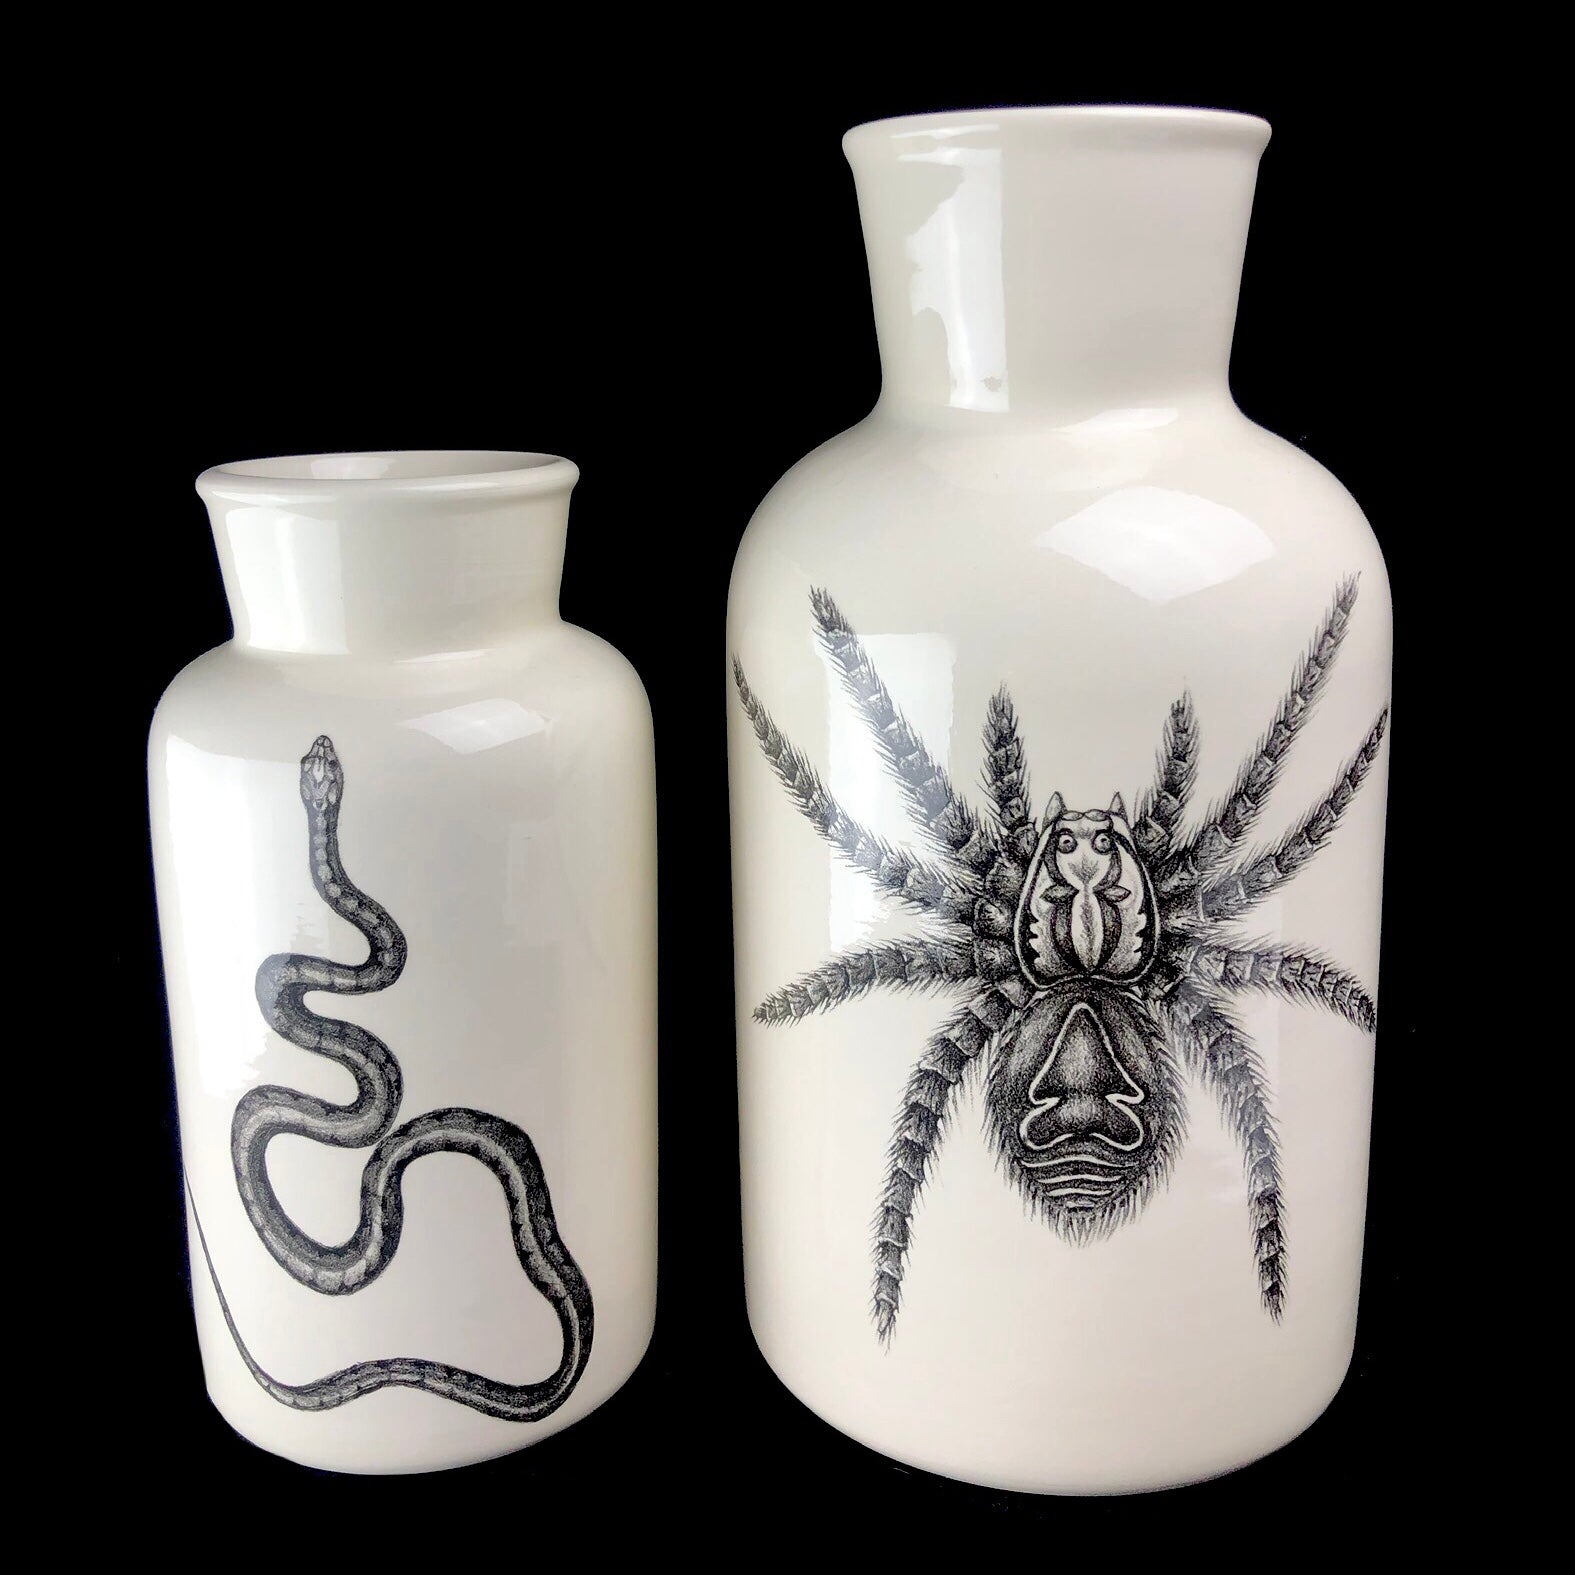 Large and Medium sized white vases with black drawings of a snake and a tarantula.